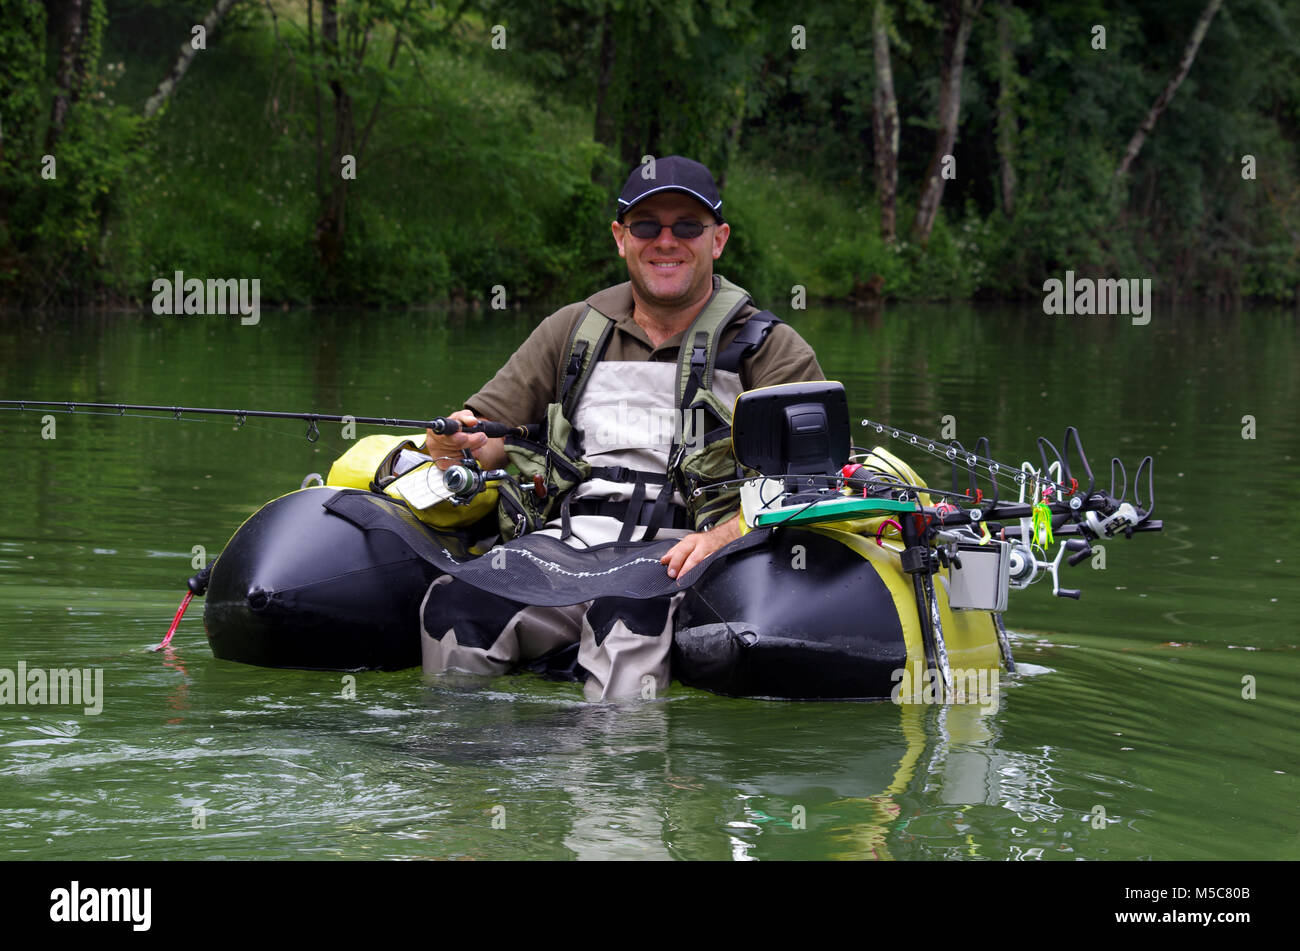 https://c8.alamy.com/comp/M5C80B/fishing-with-a-float-tube-the-man-is-sitting-in-the-fishing-inflatable-M5C80B.jpg